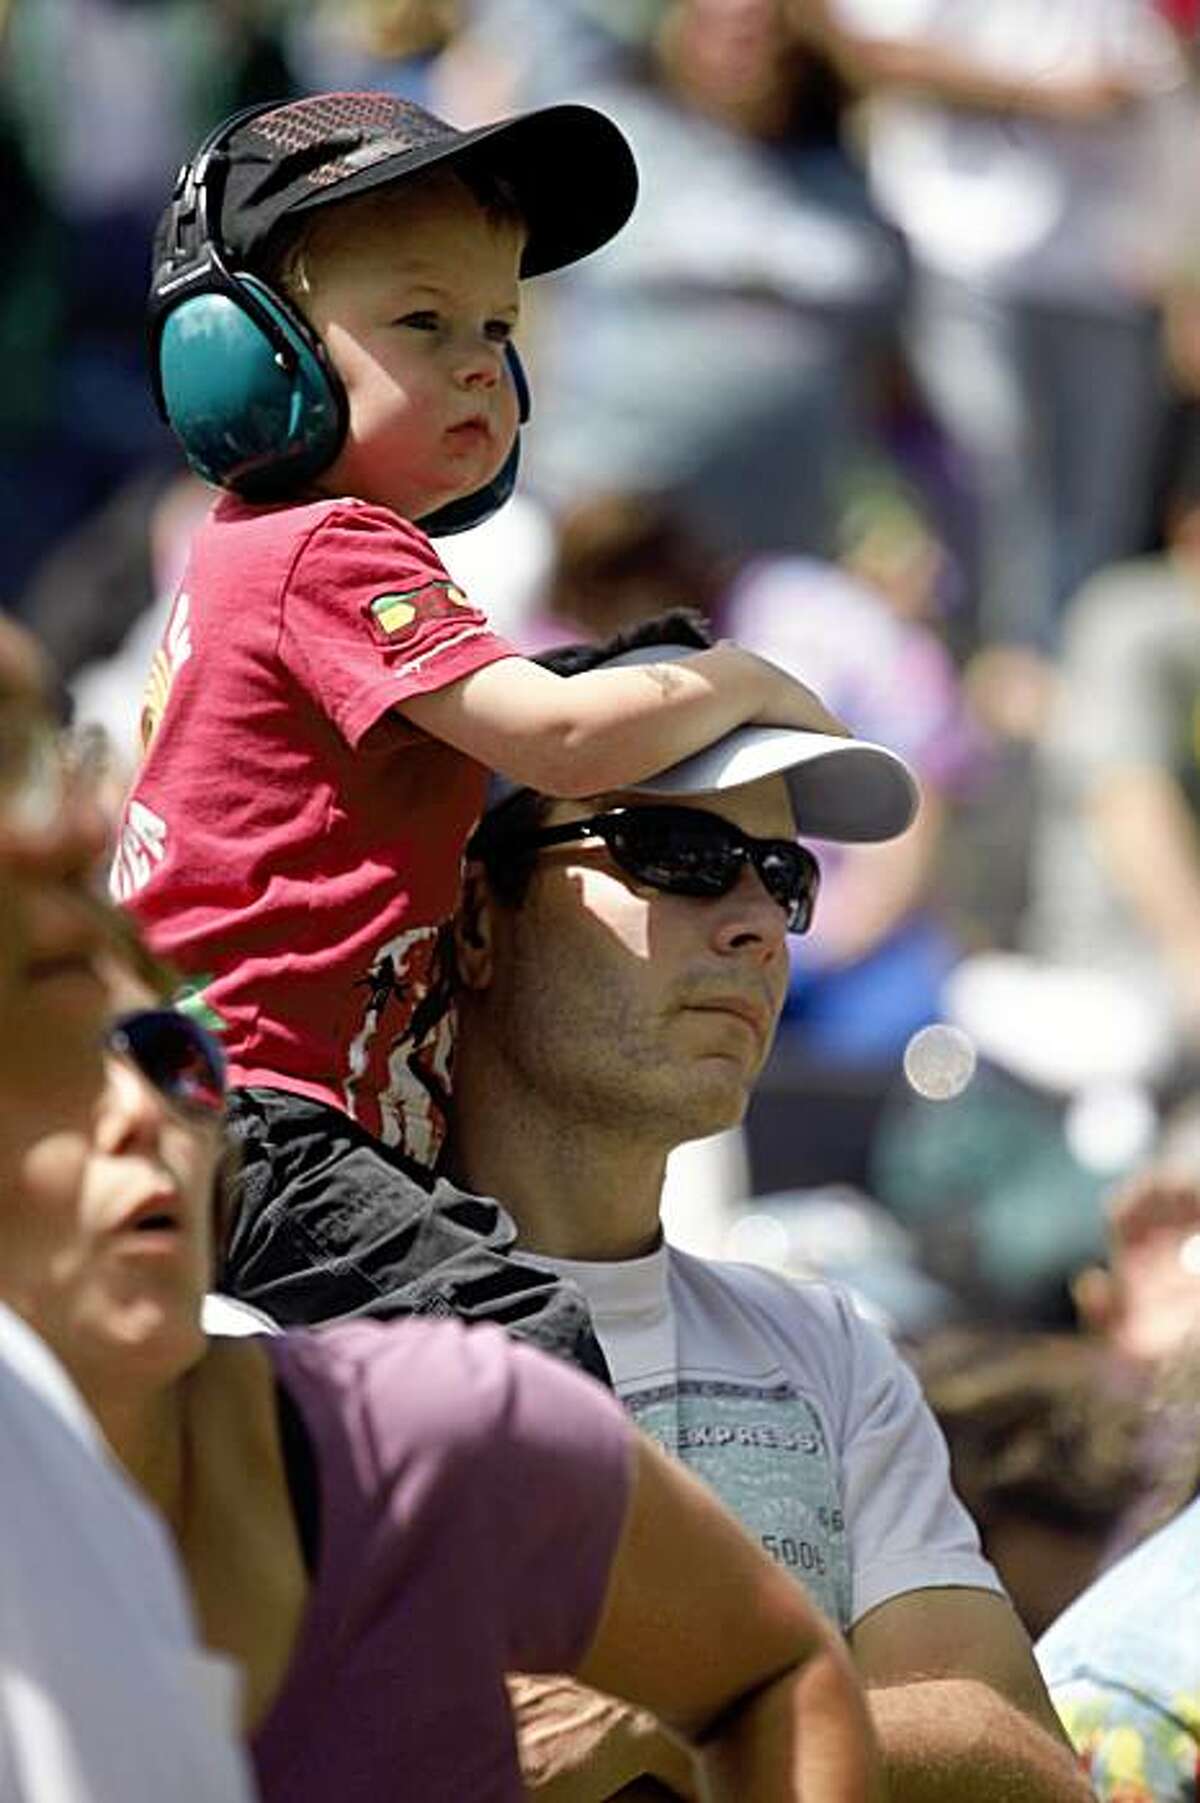 Bruce Lehnert holds his son Lexington Lehnert, 3, both of San Francisco, on his shoulders as they watch Stu Allen and Friends perform at the seventh annual Jerry Day celebration in John McClaren Park on Sunday.